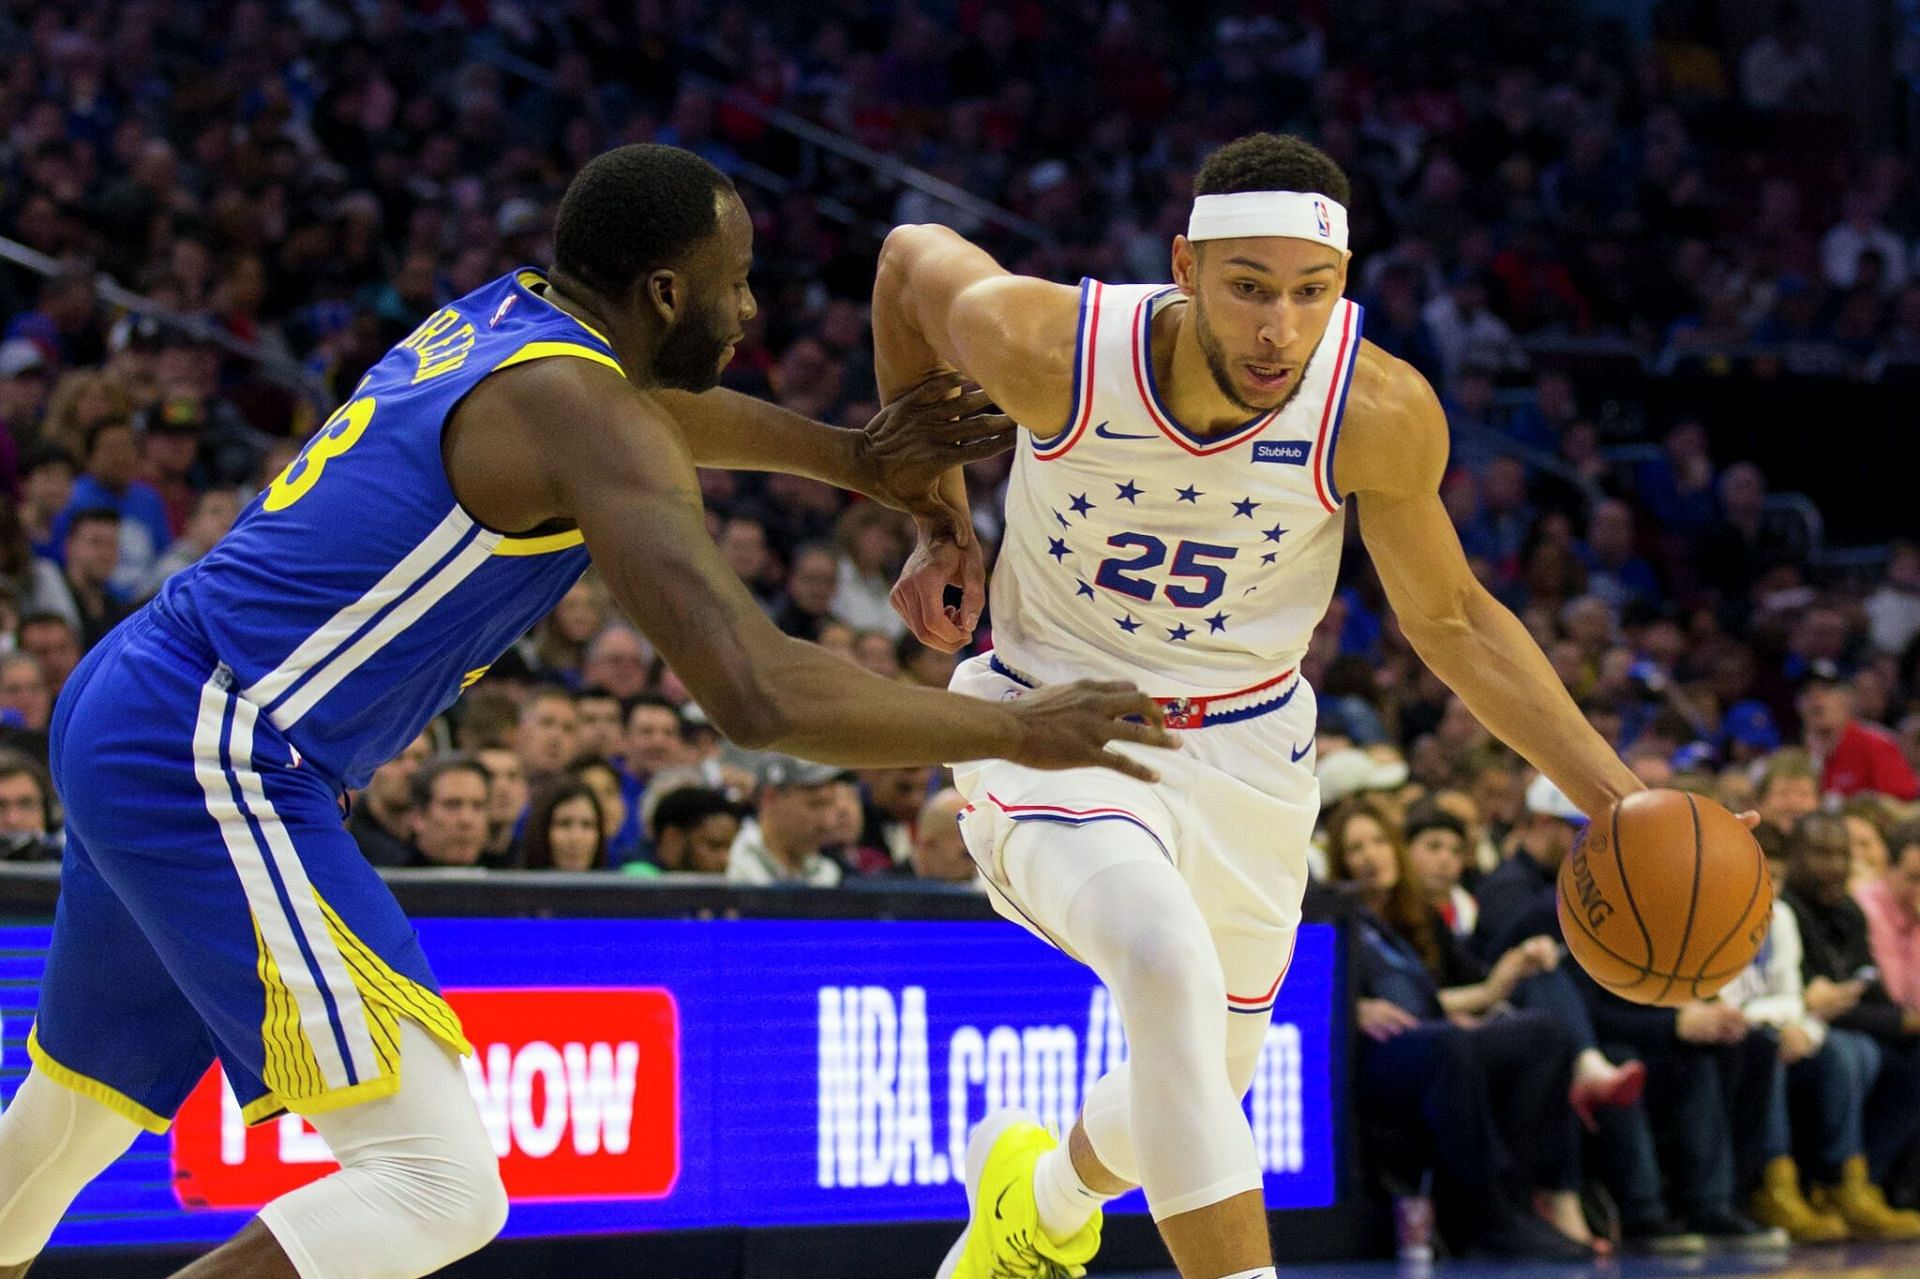 Ben Simmons could handle the same role Draymond Green has with the Golden State Warriors. [Photo: SFGATE]